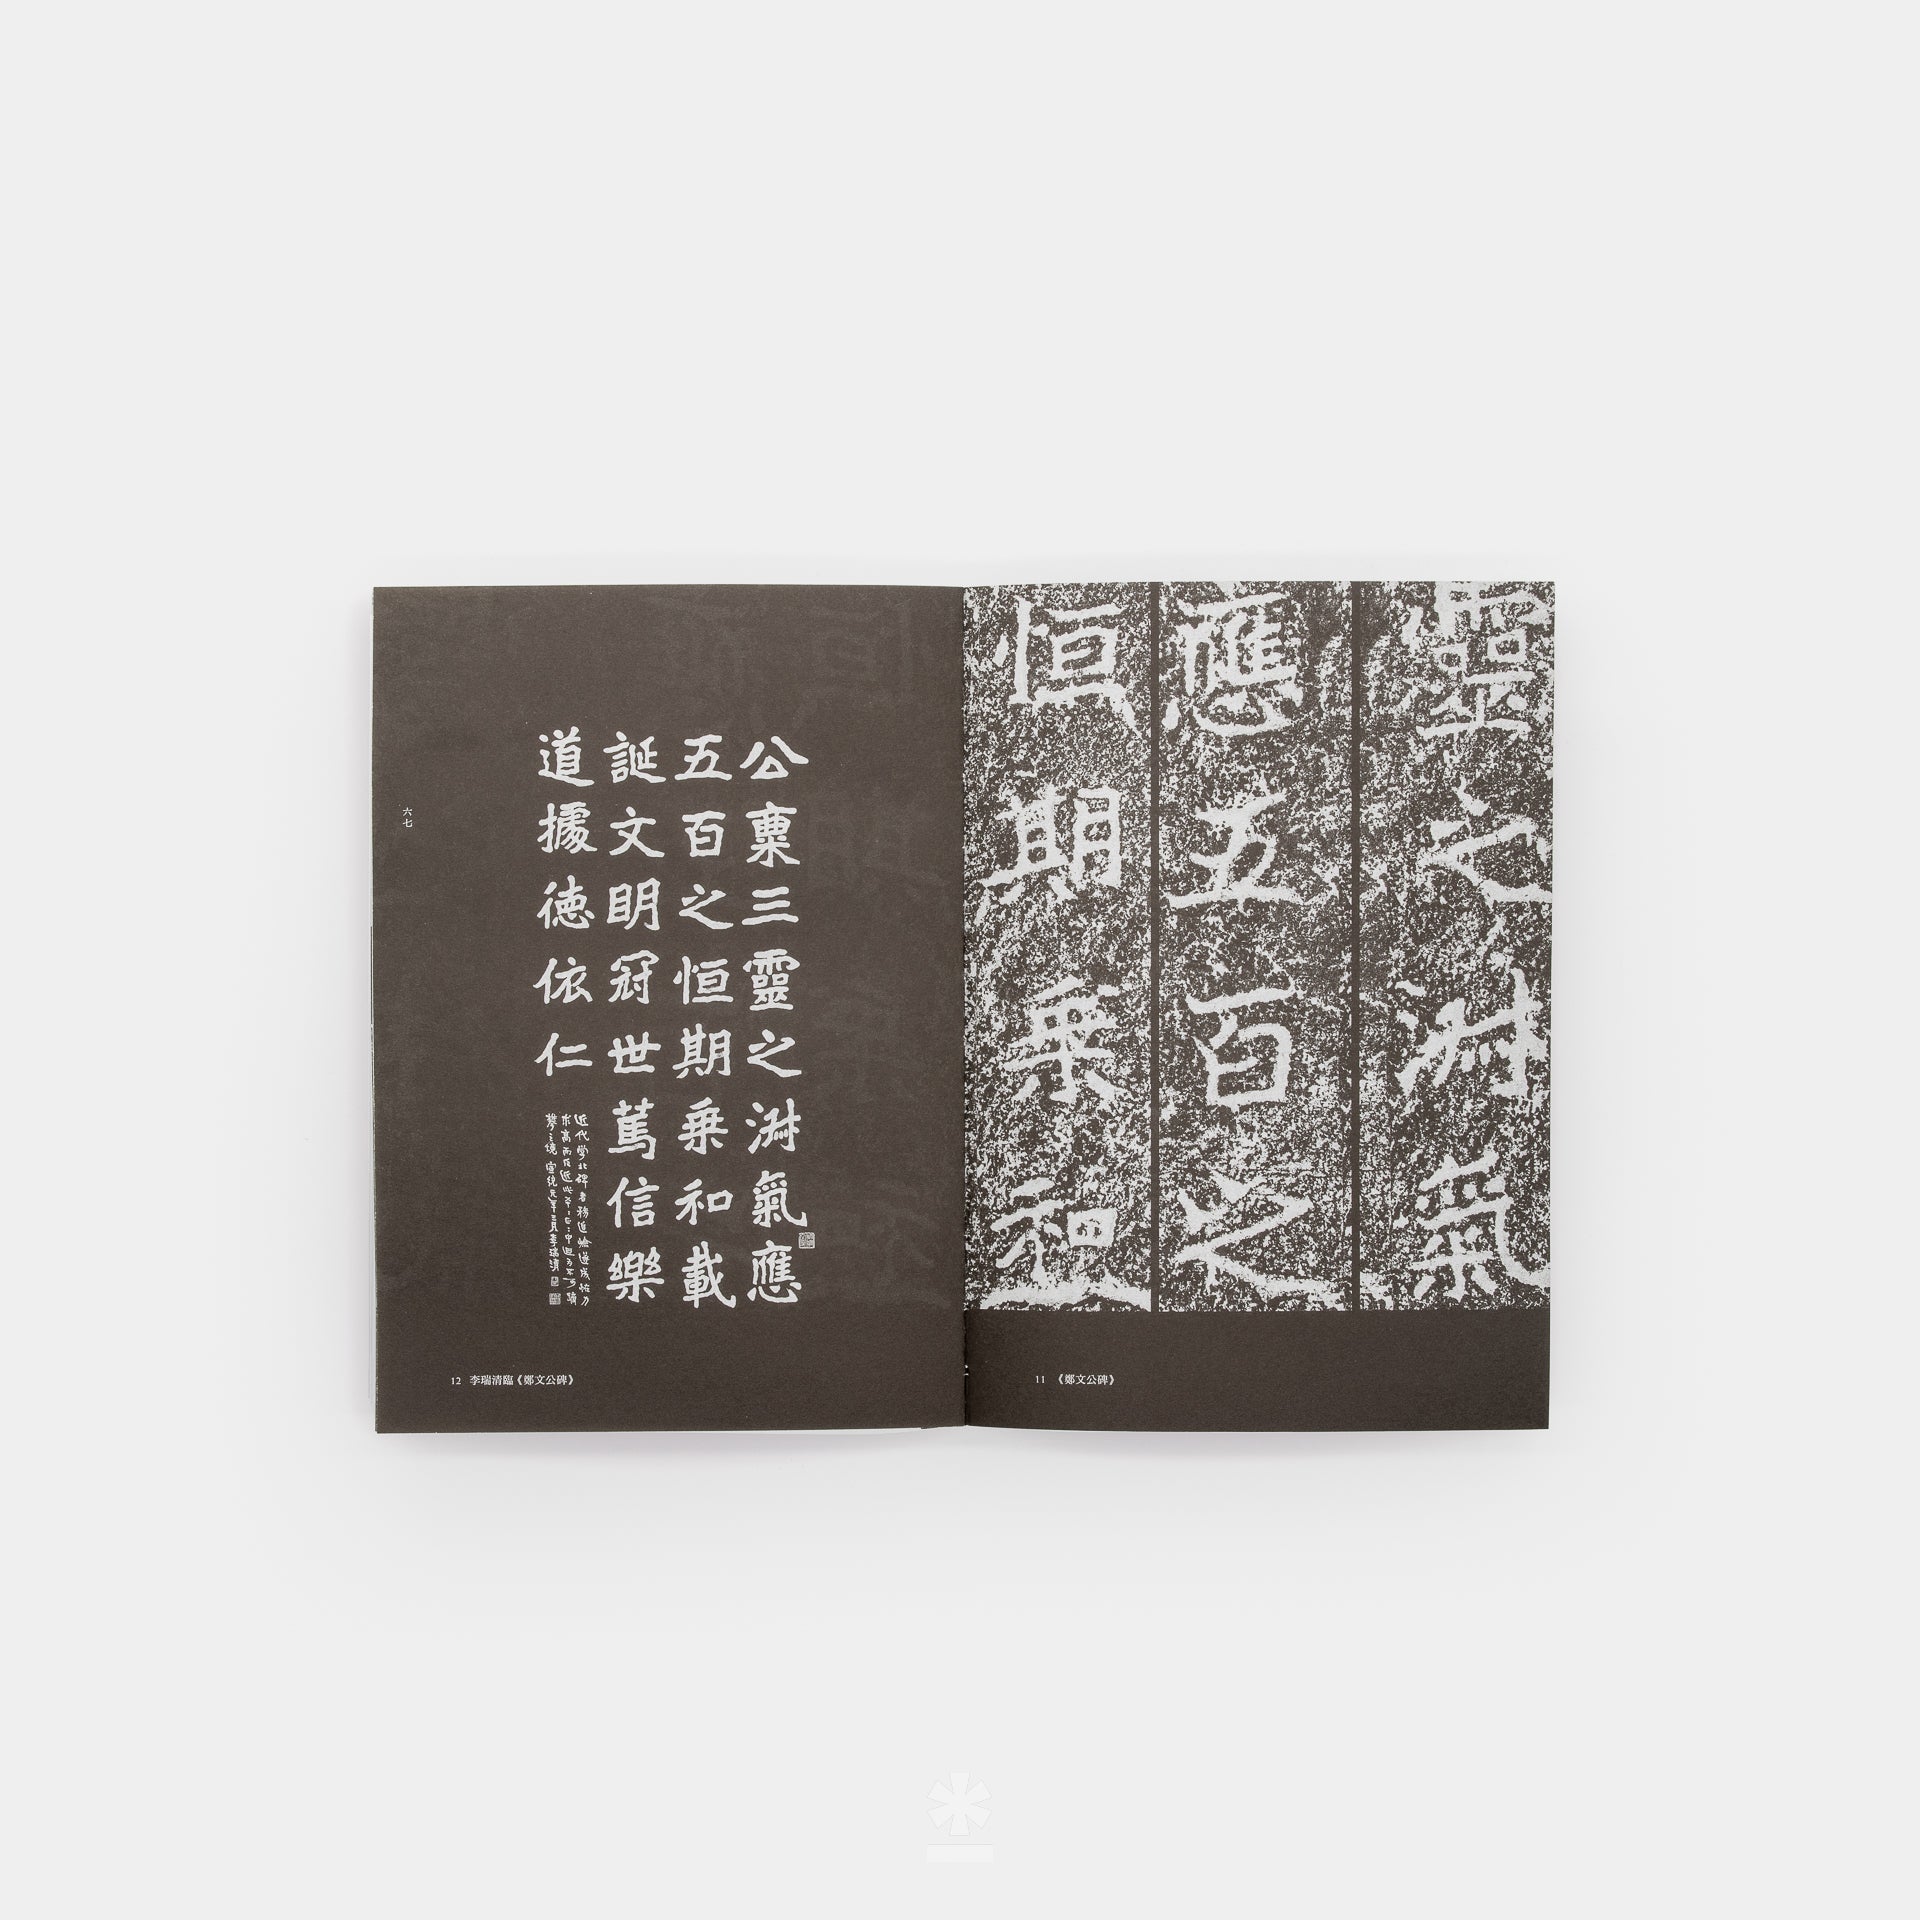 A Study on Hong Kong Beiwei Calligraphy and Type Design (香港北魏真書)